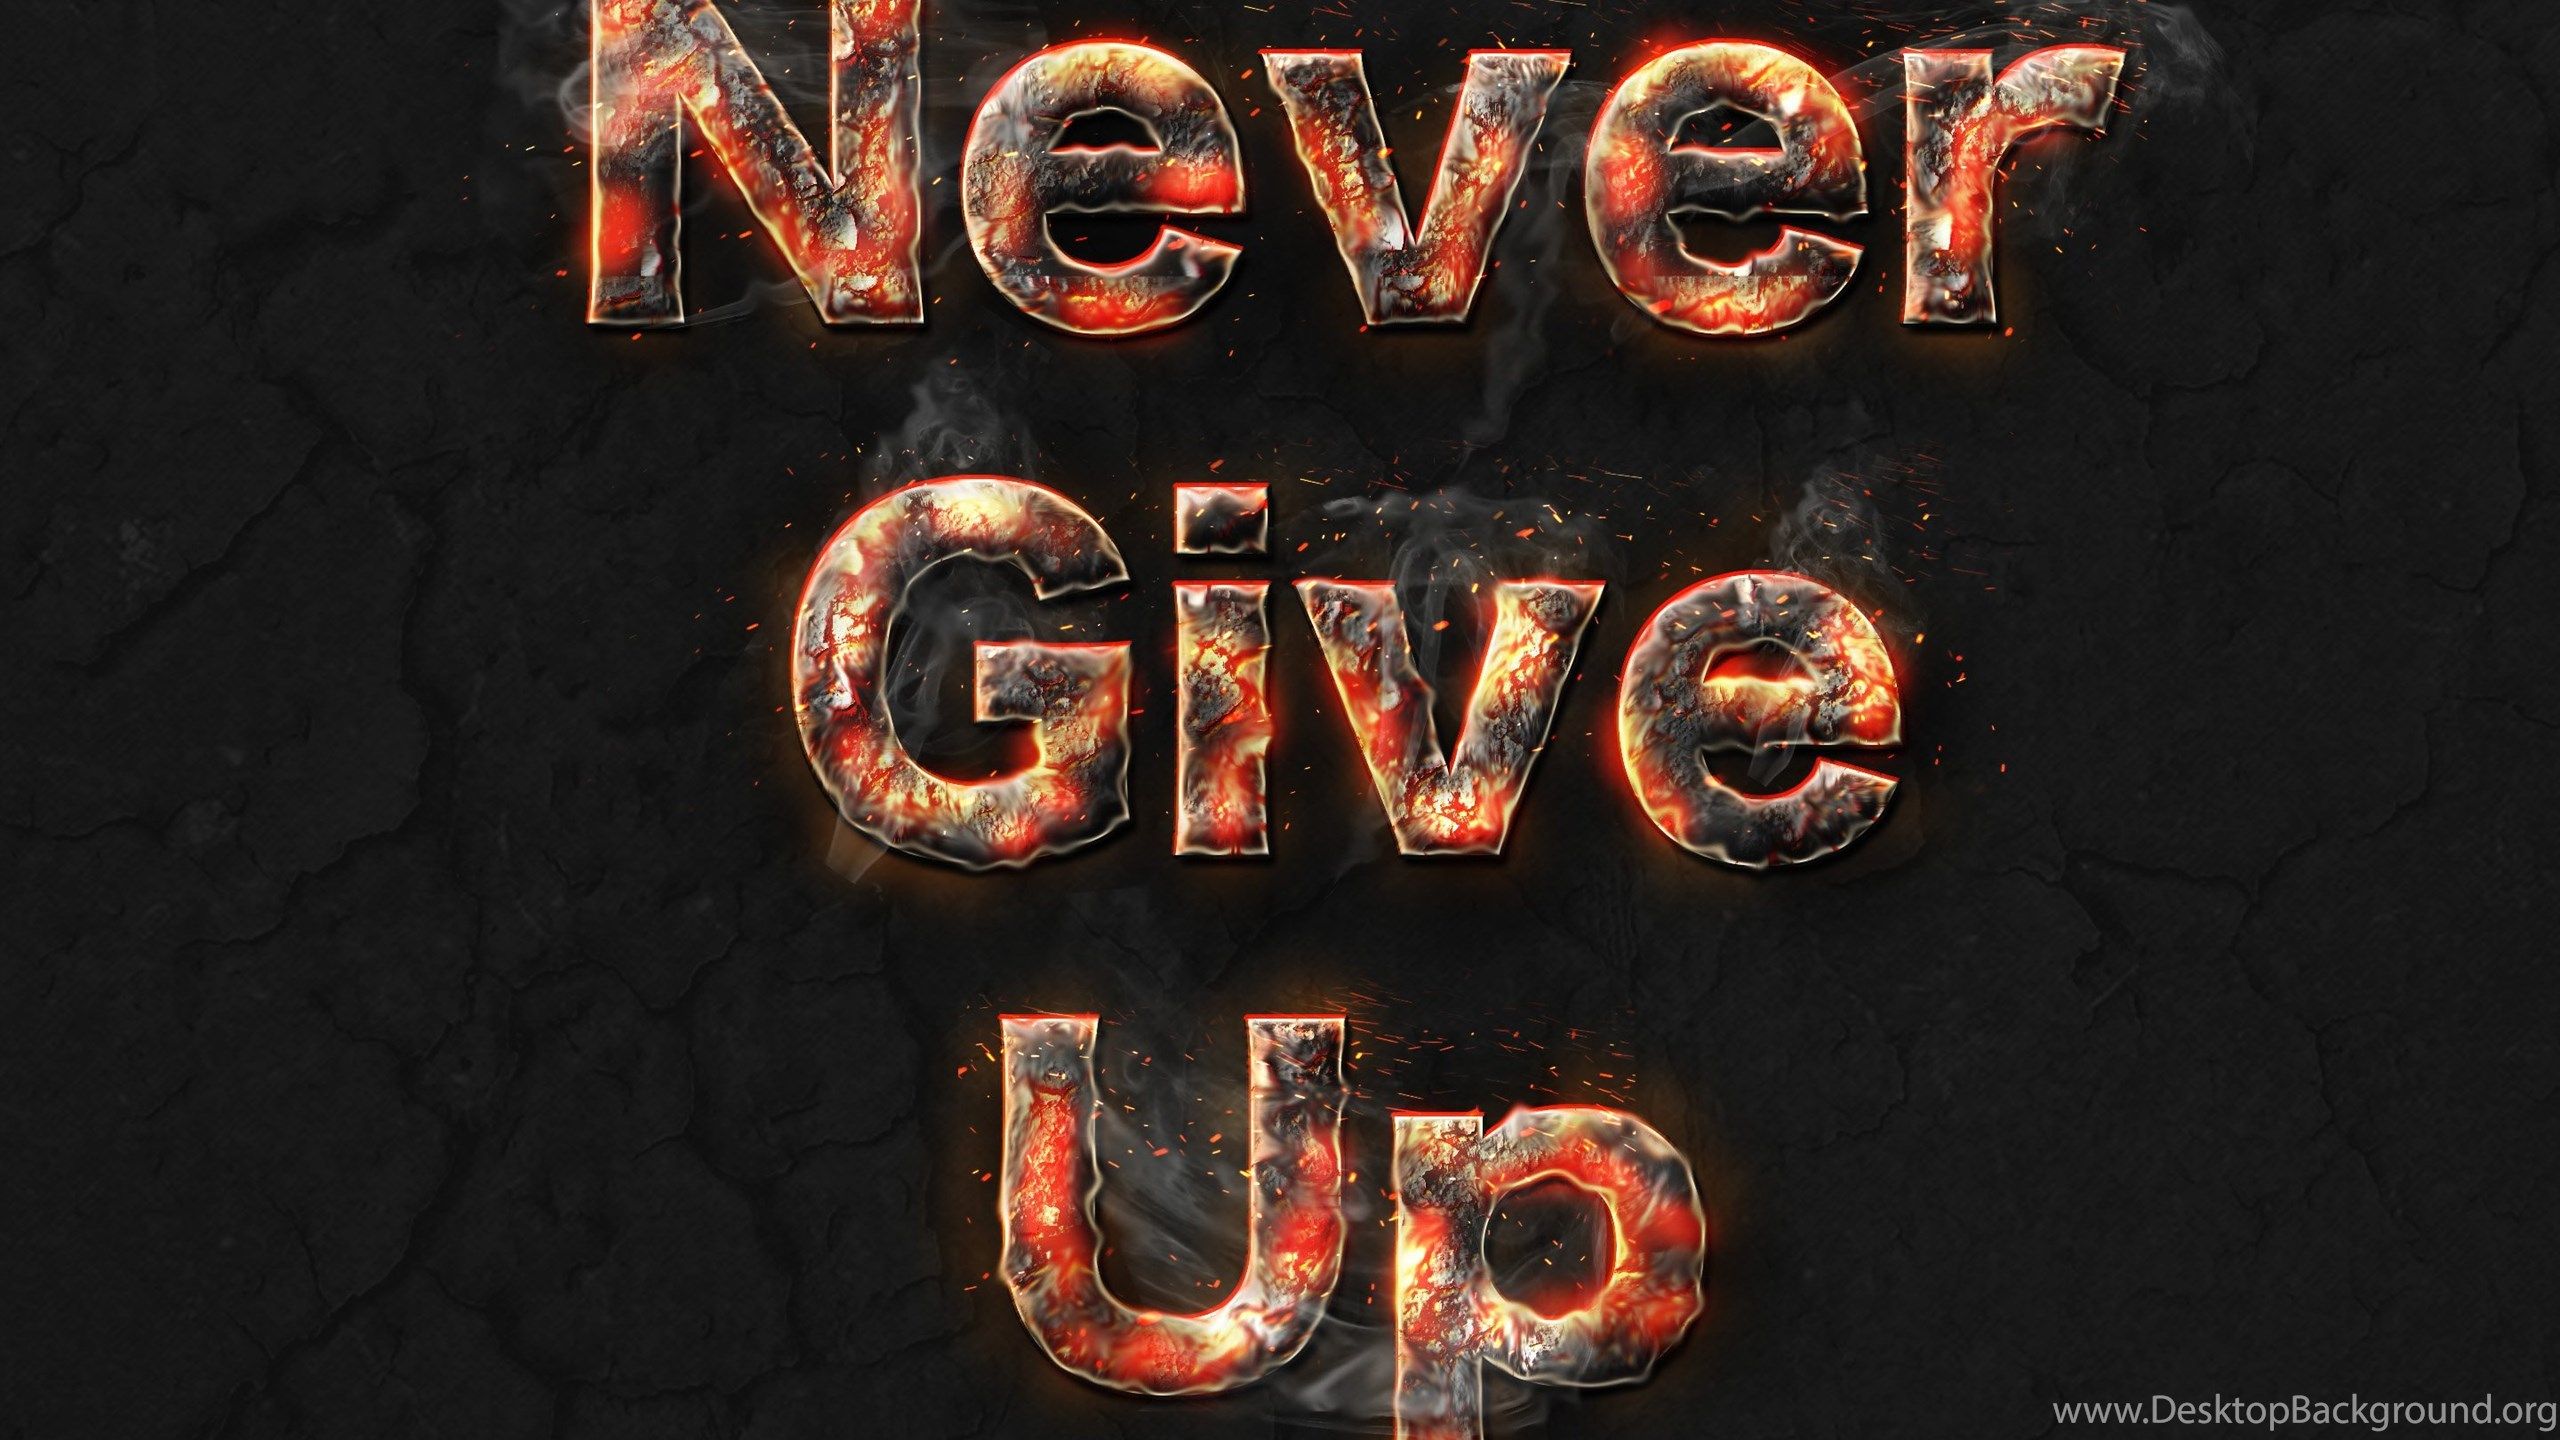 Other Wallpaper: Never Give Up Free Wallpaper For HD Wallpaper. Desktop Background